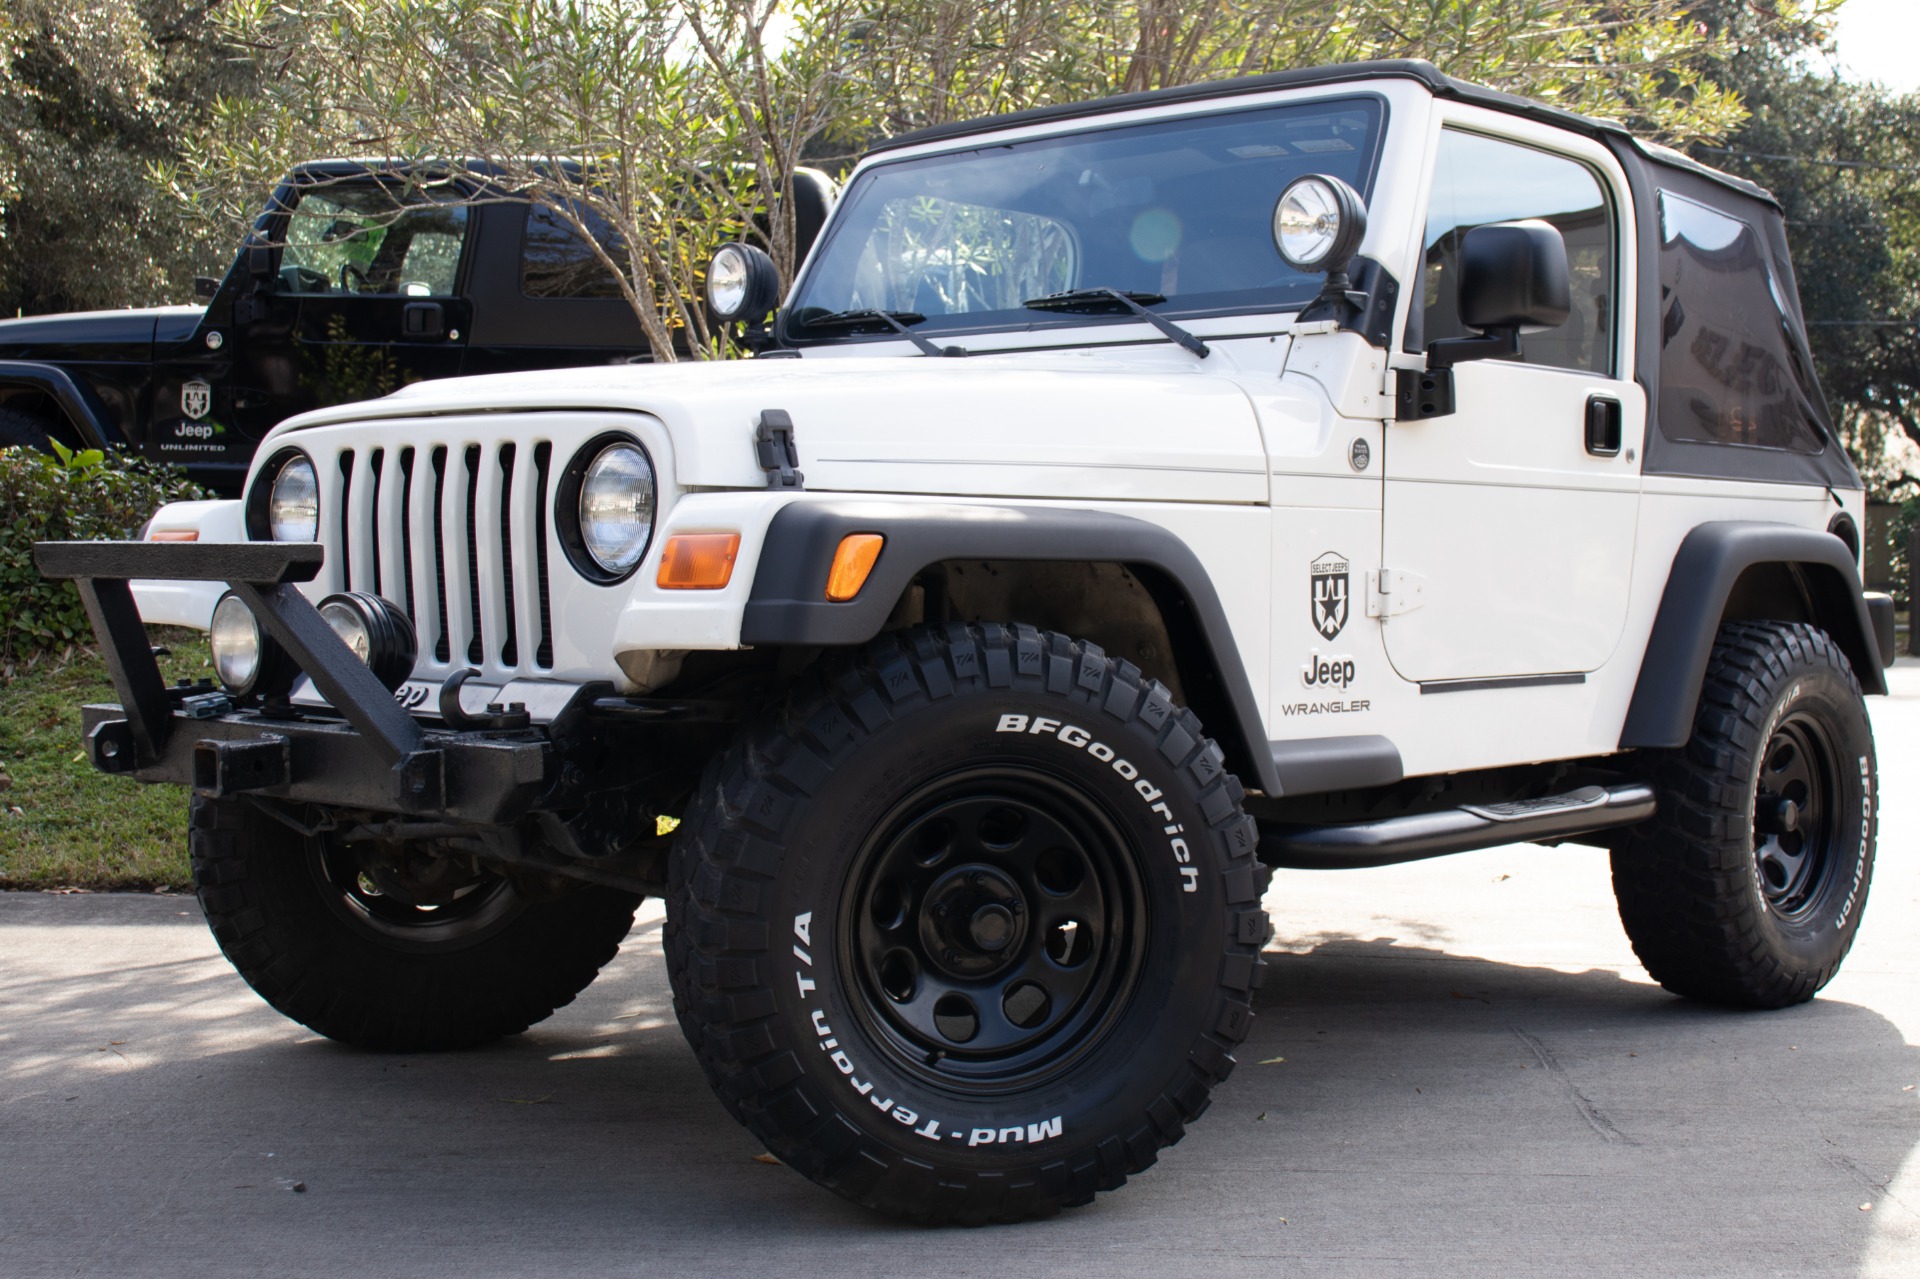 Used 2005 Jeep Wrangler SE For Sale ($10,995) | Select Jeeps Inc. Stock  #339682